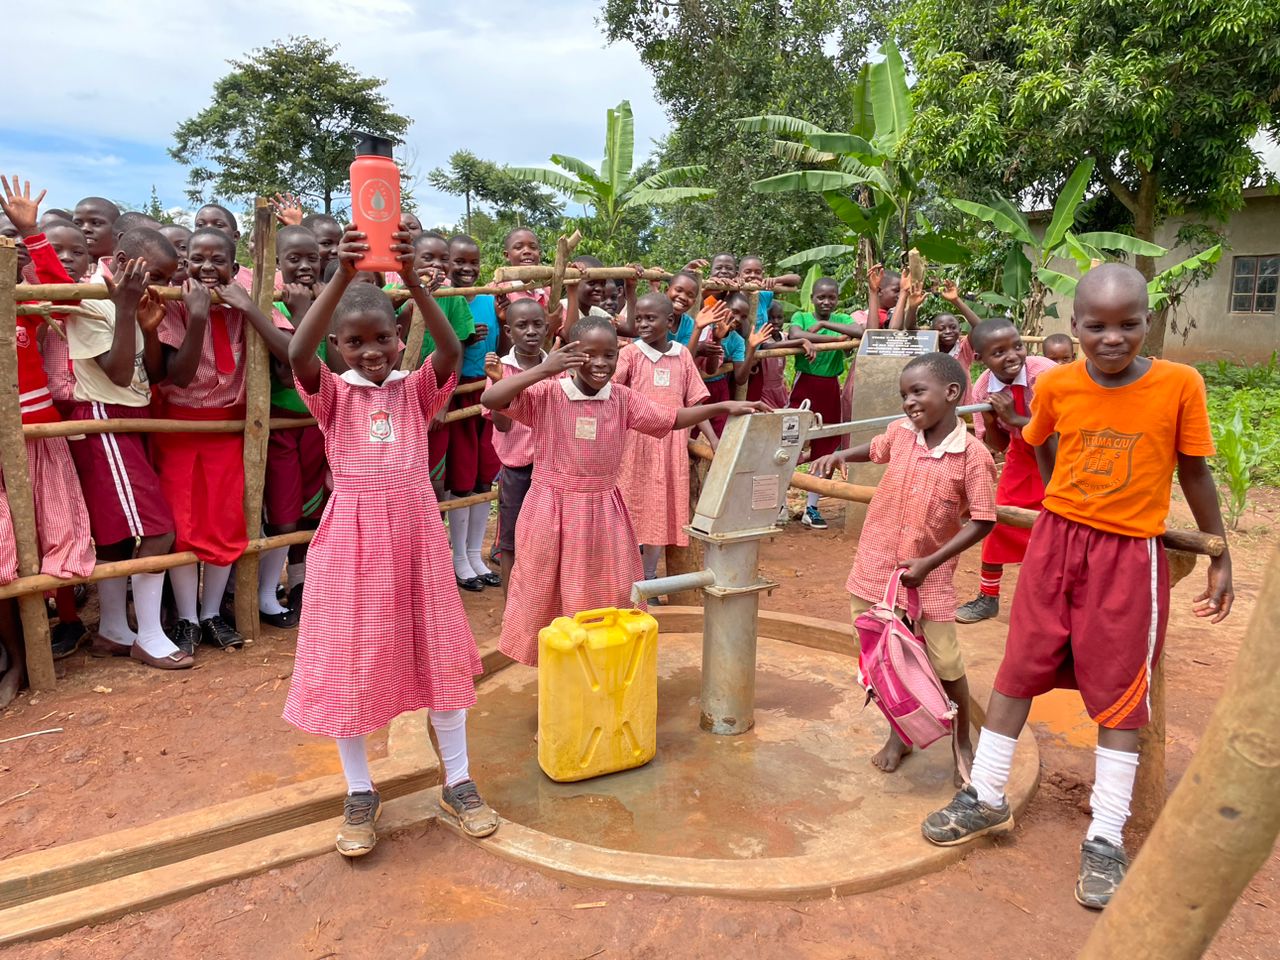 Load video: The Ripple Effect to fix the clean water crisis